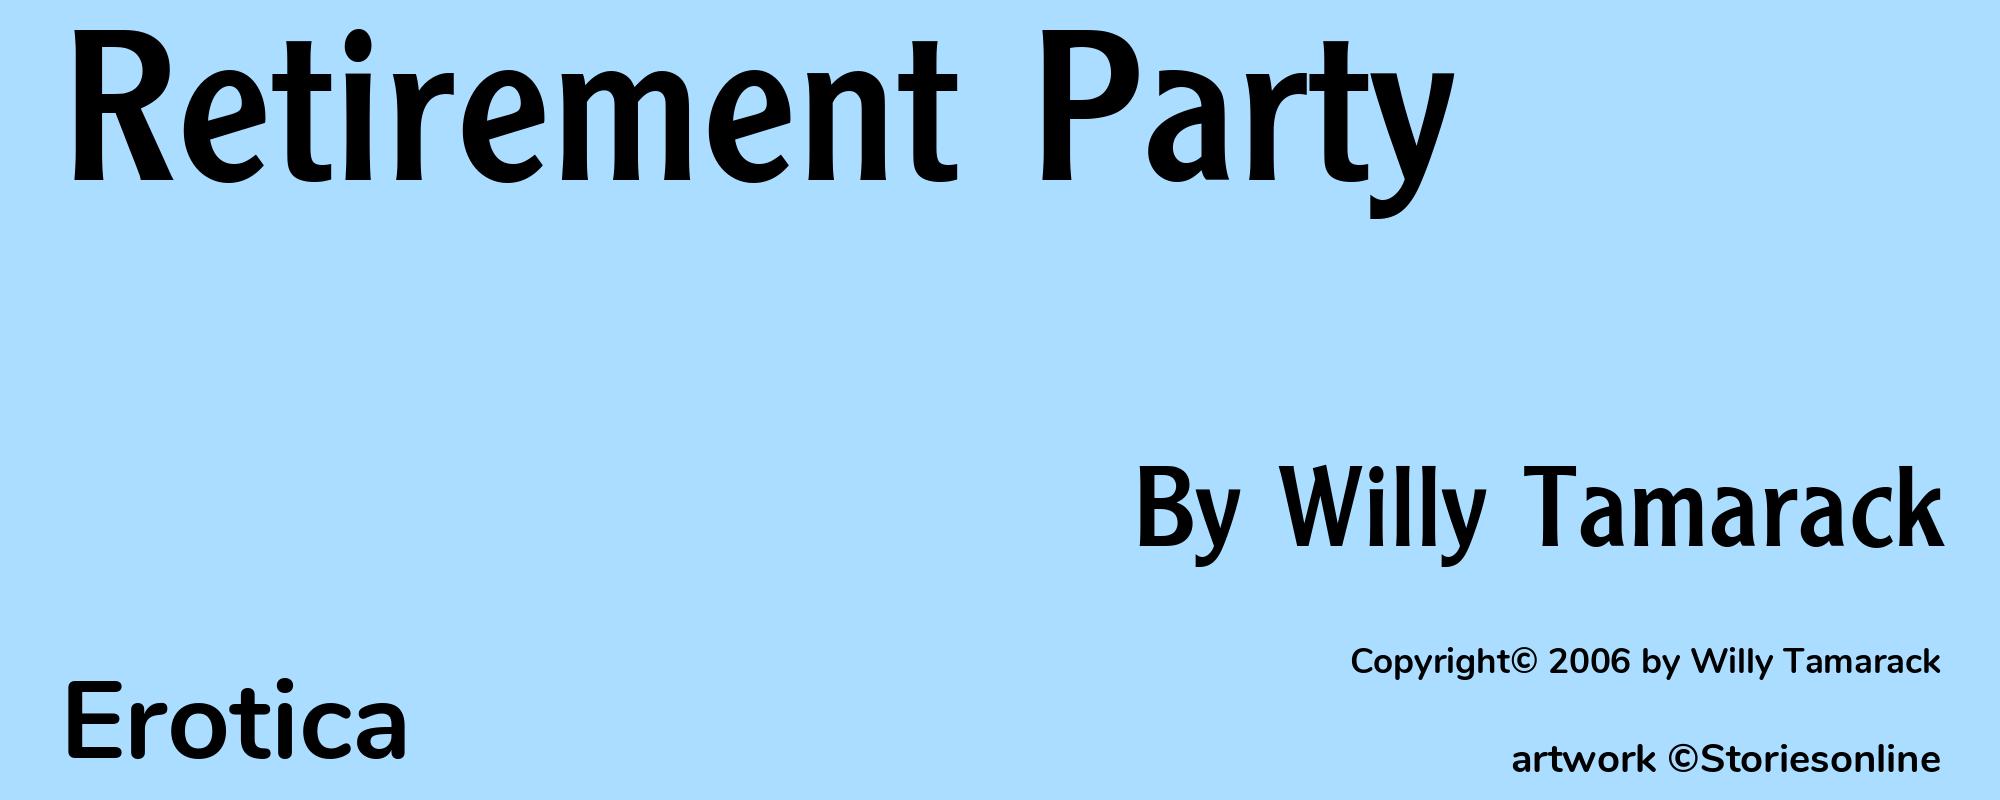 Retirement Party - Cover